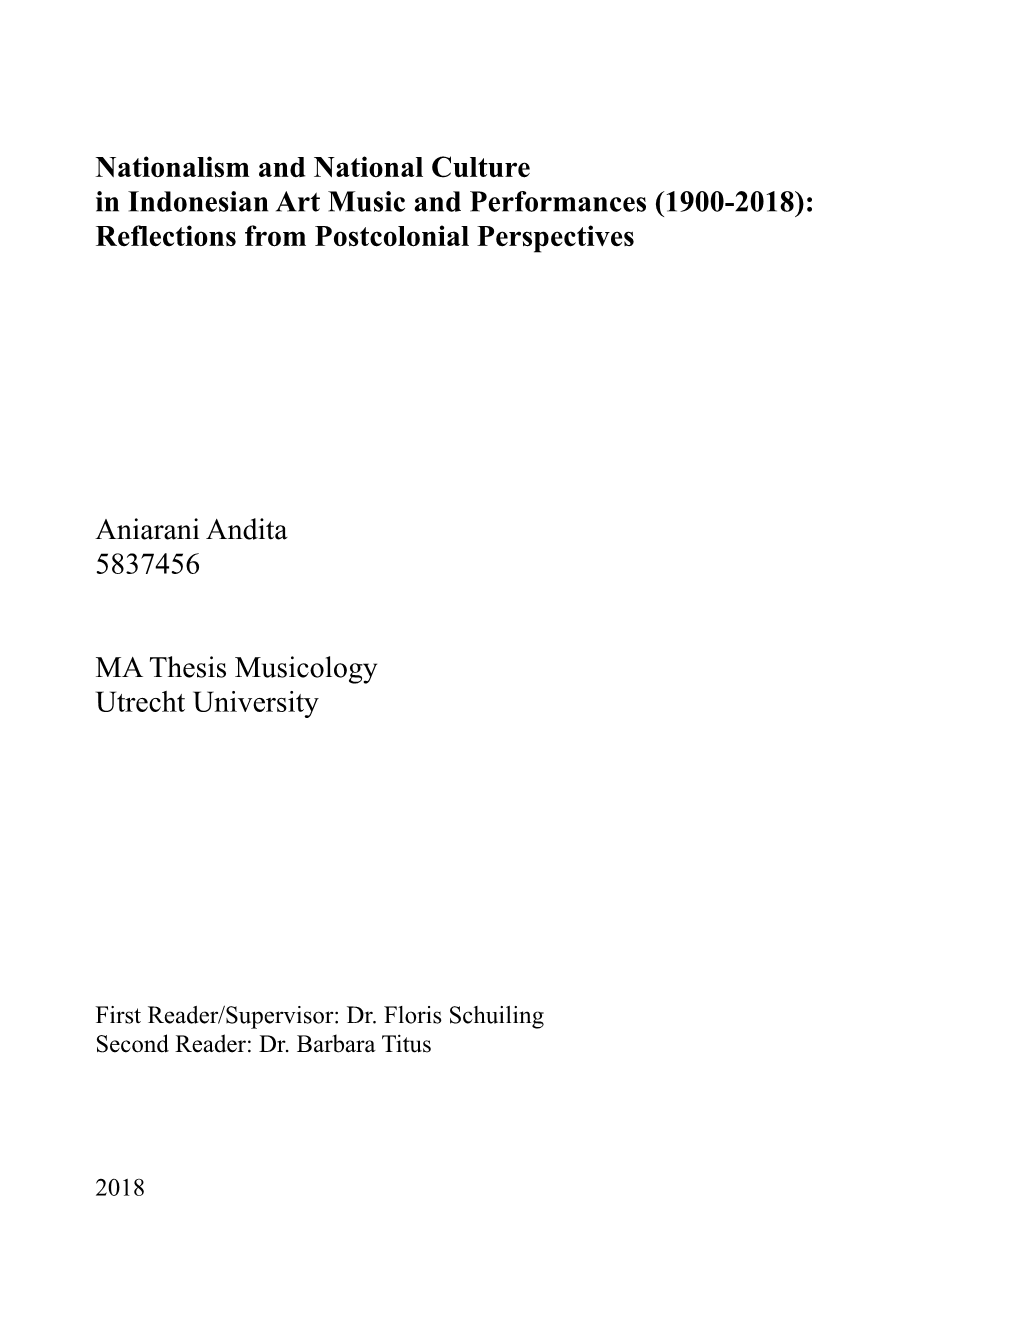 Nationalism and National Culture in Indonesian Art Music and Performances (1900-2018): Reflections from Postcolonial Perspectives